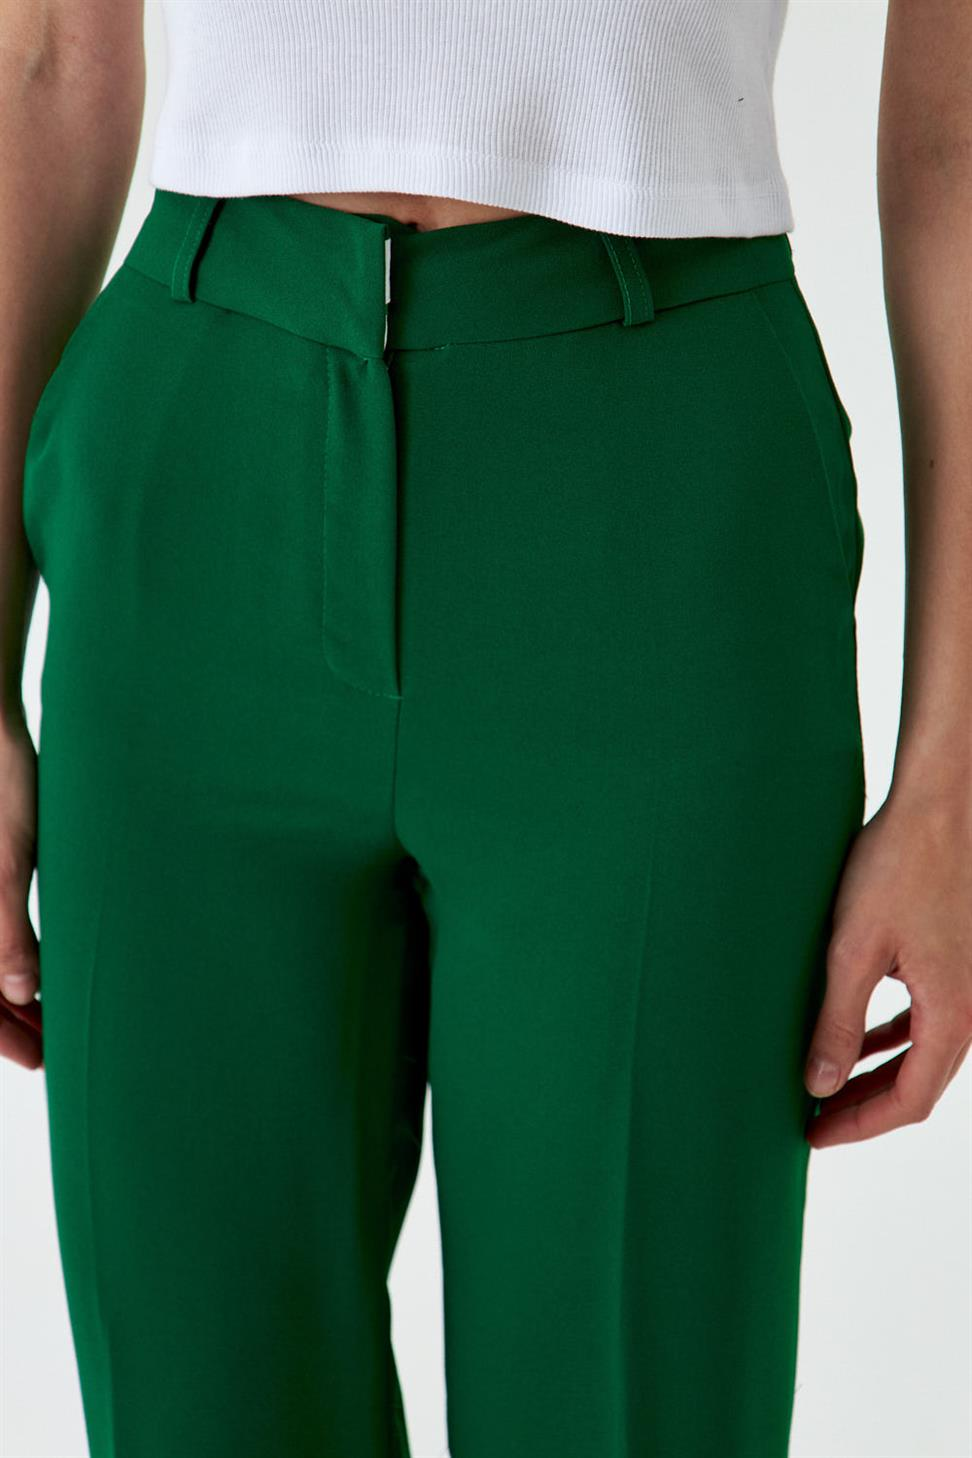 Green WOMEN'S TROUSERS WITH SPIRAL DETAIL - Lebbse